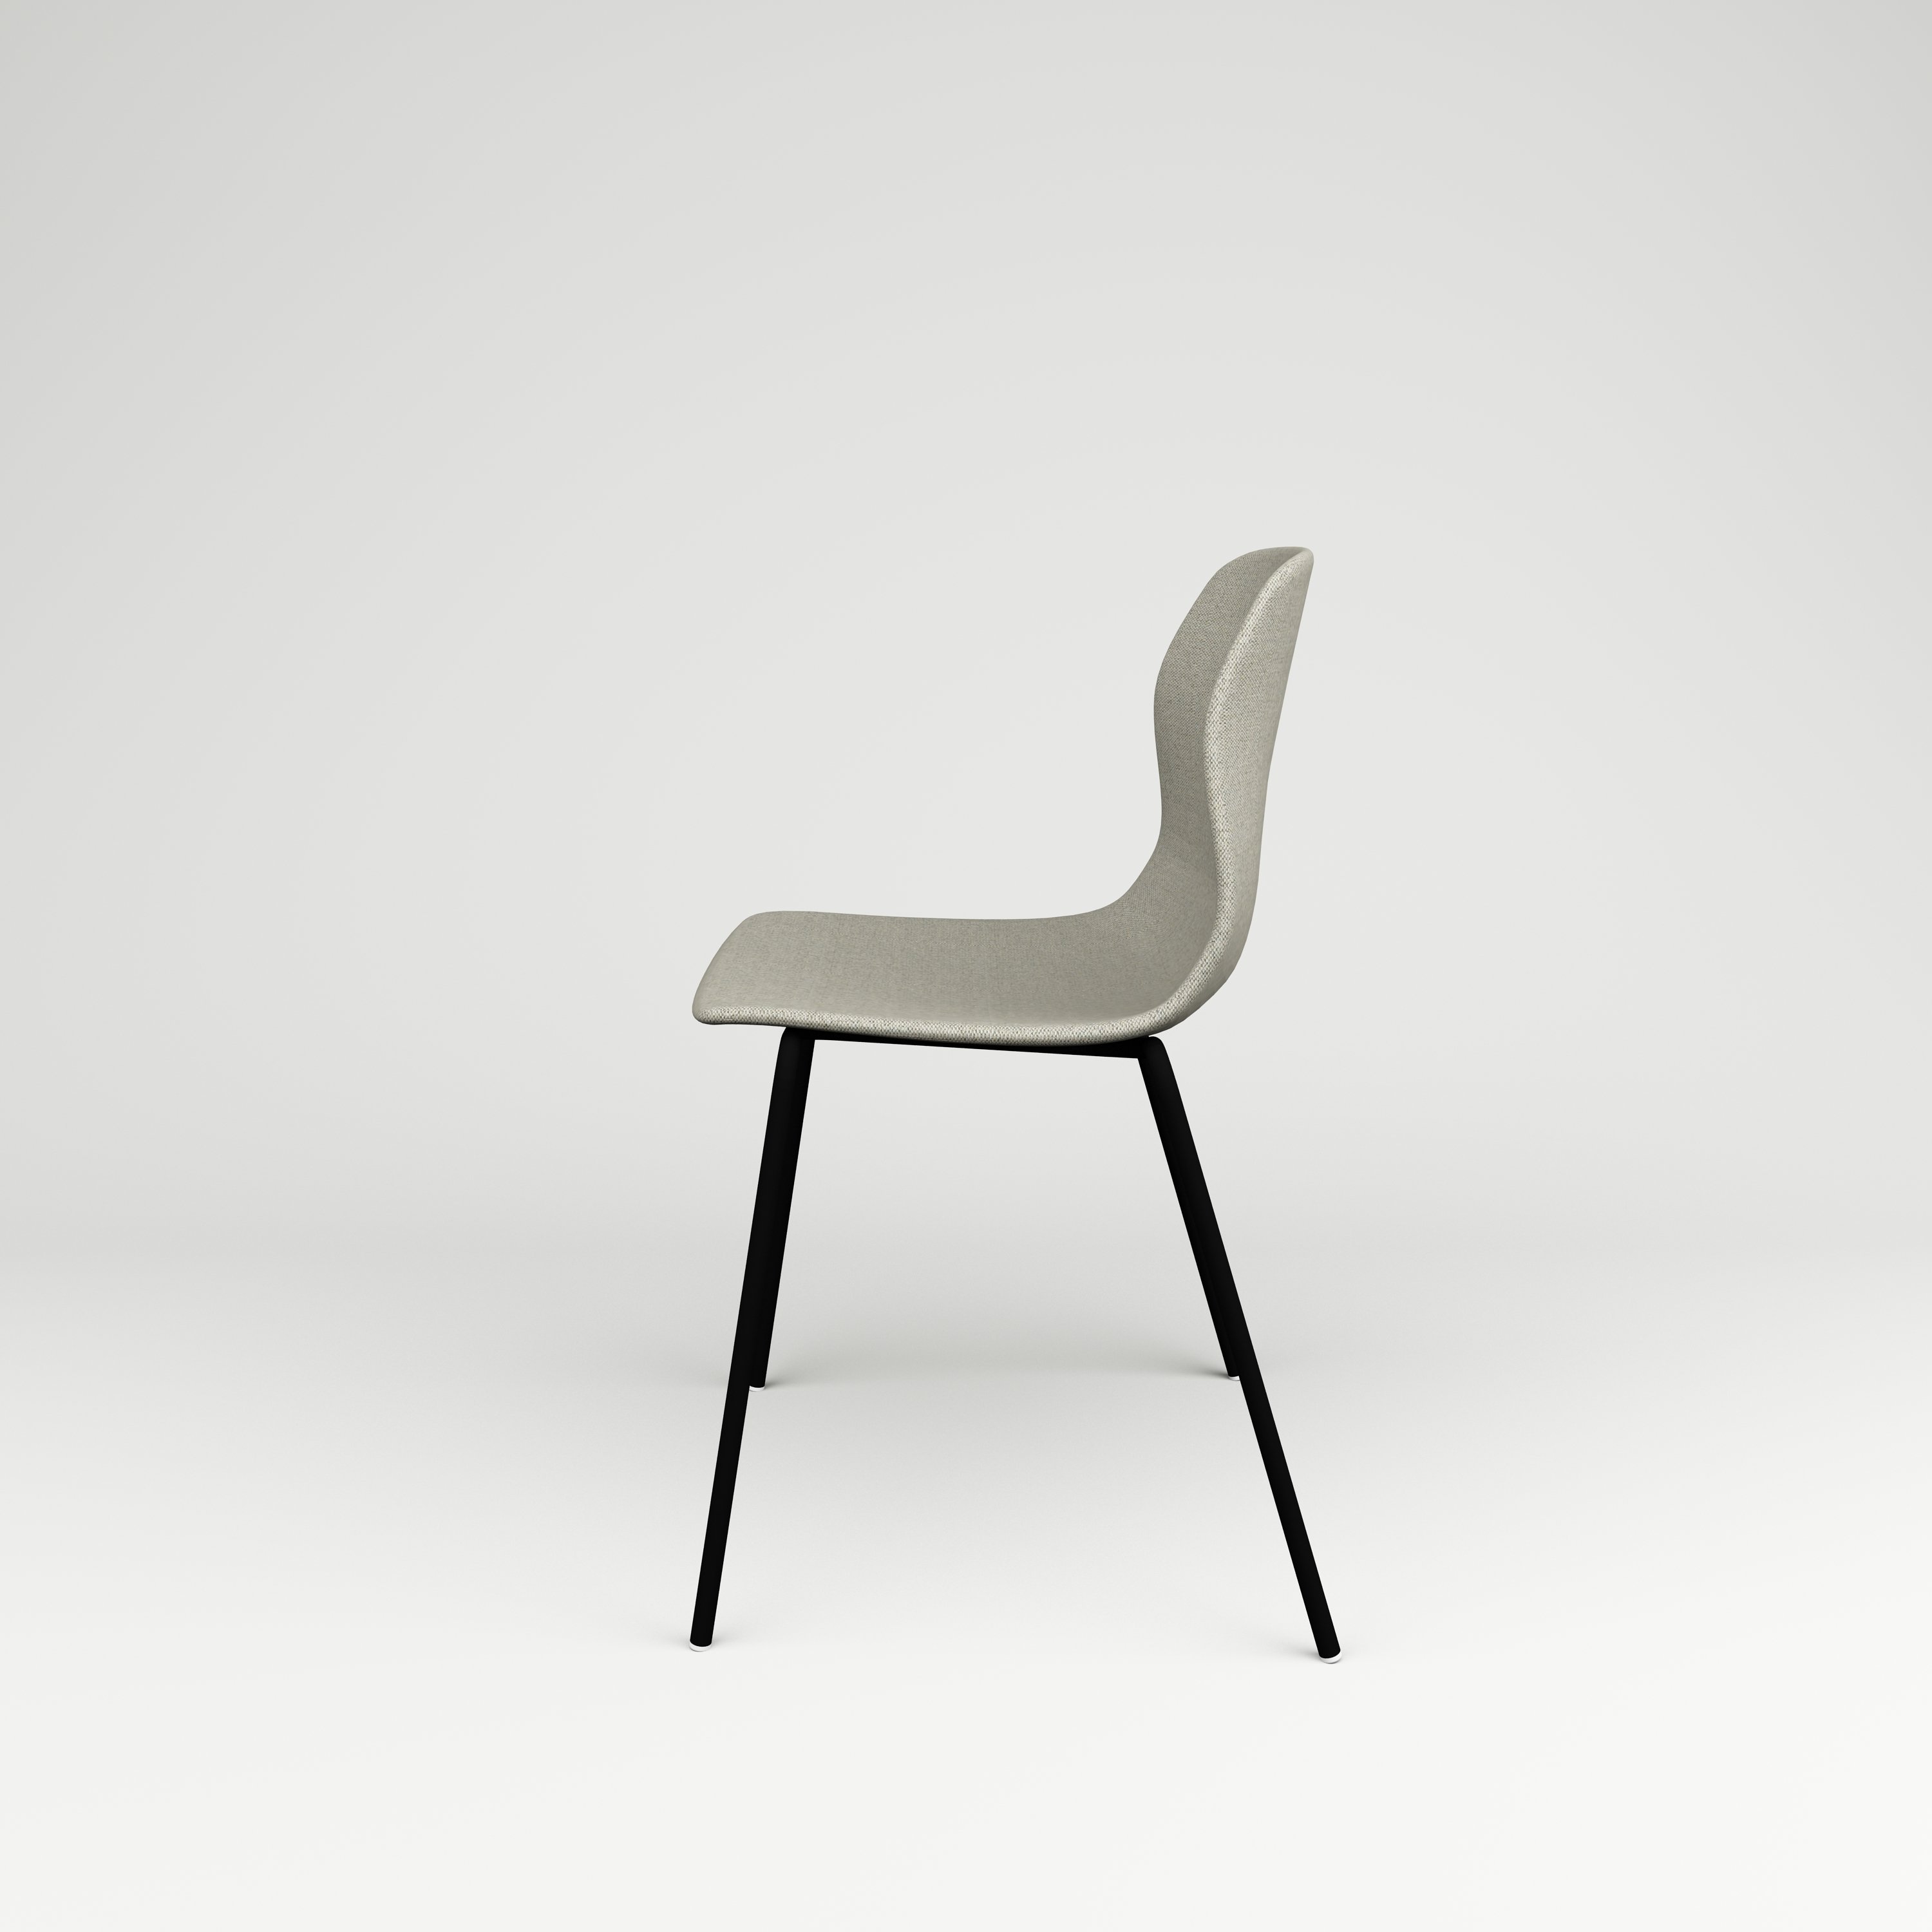 Conference chair Pelican, black legs, gray beige 